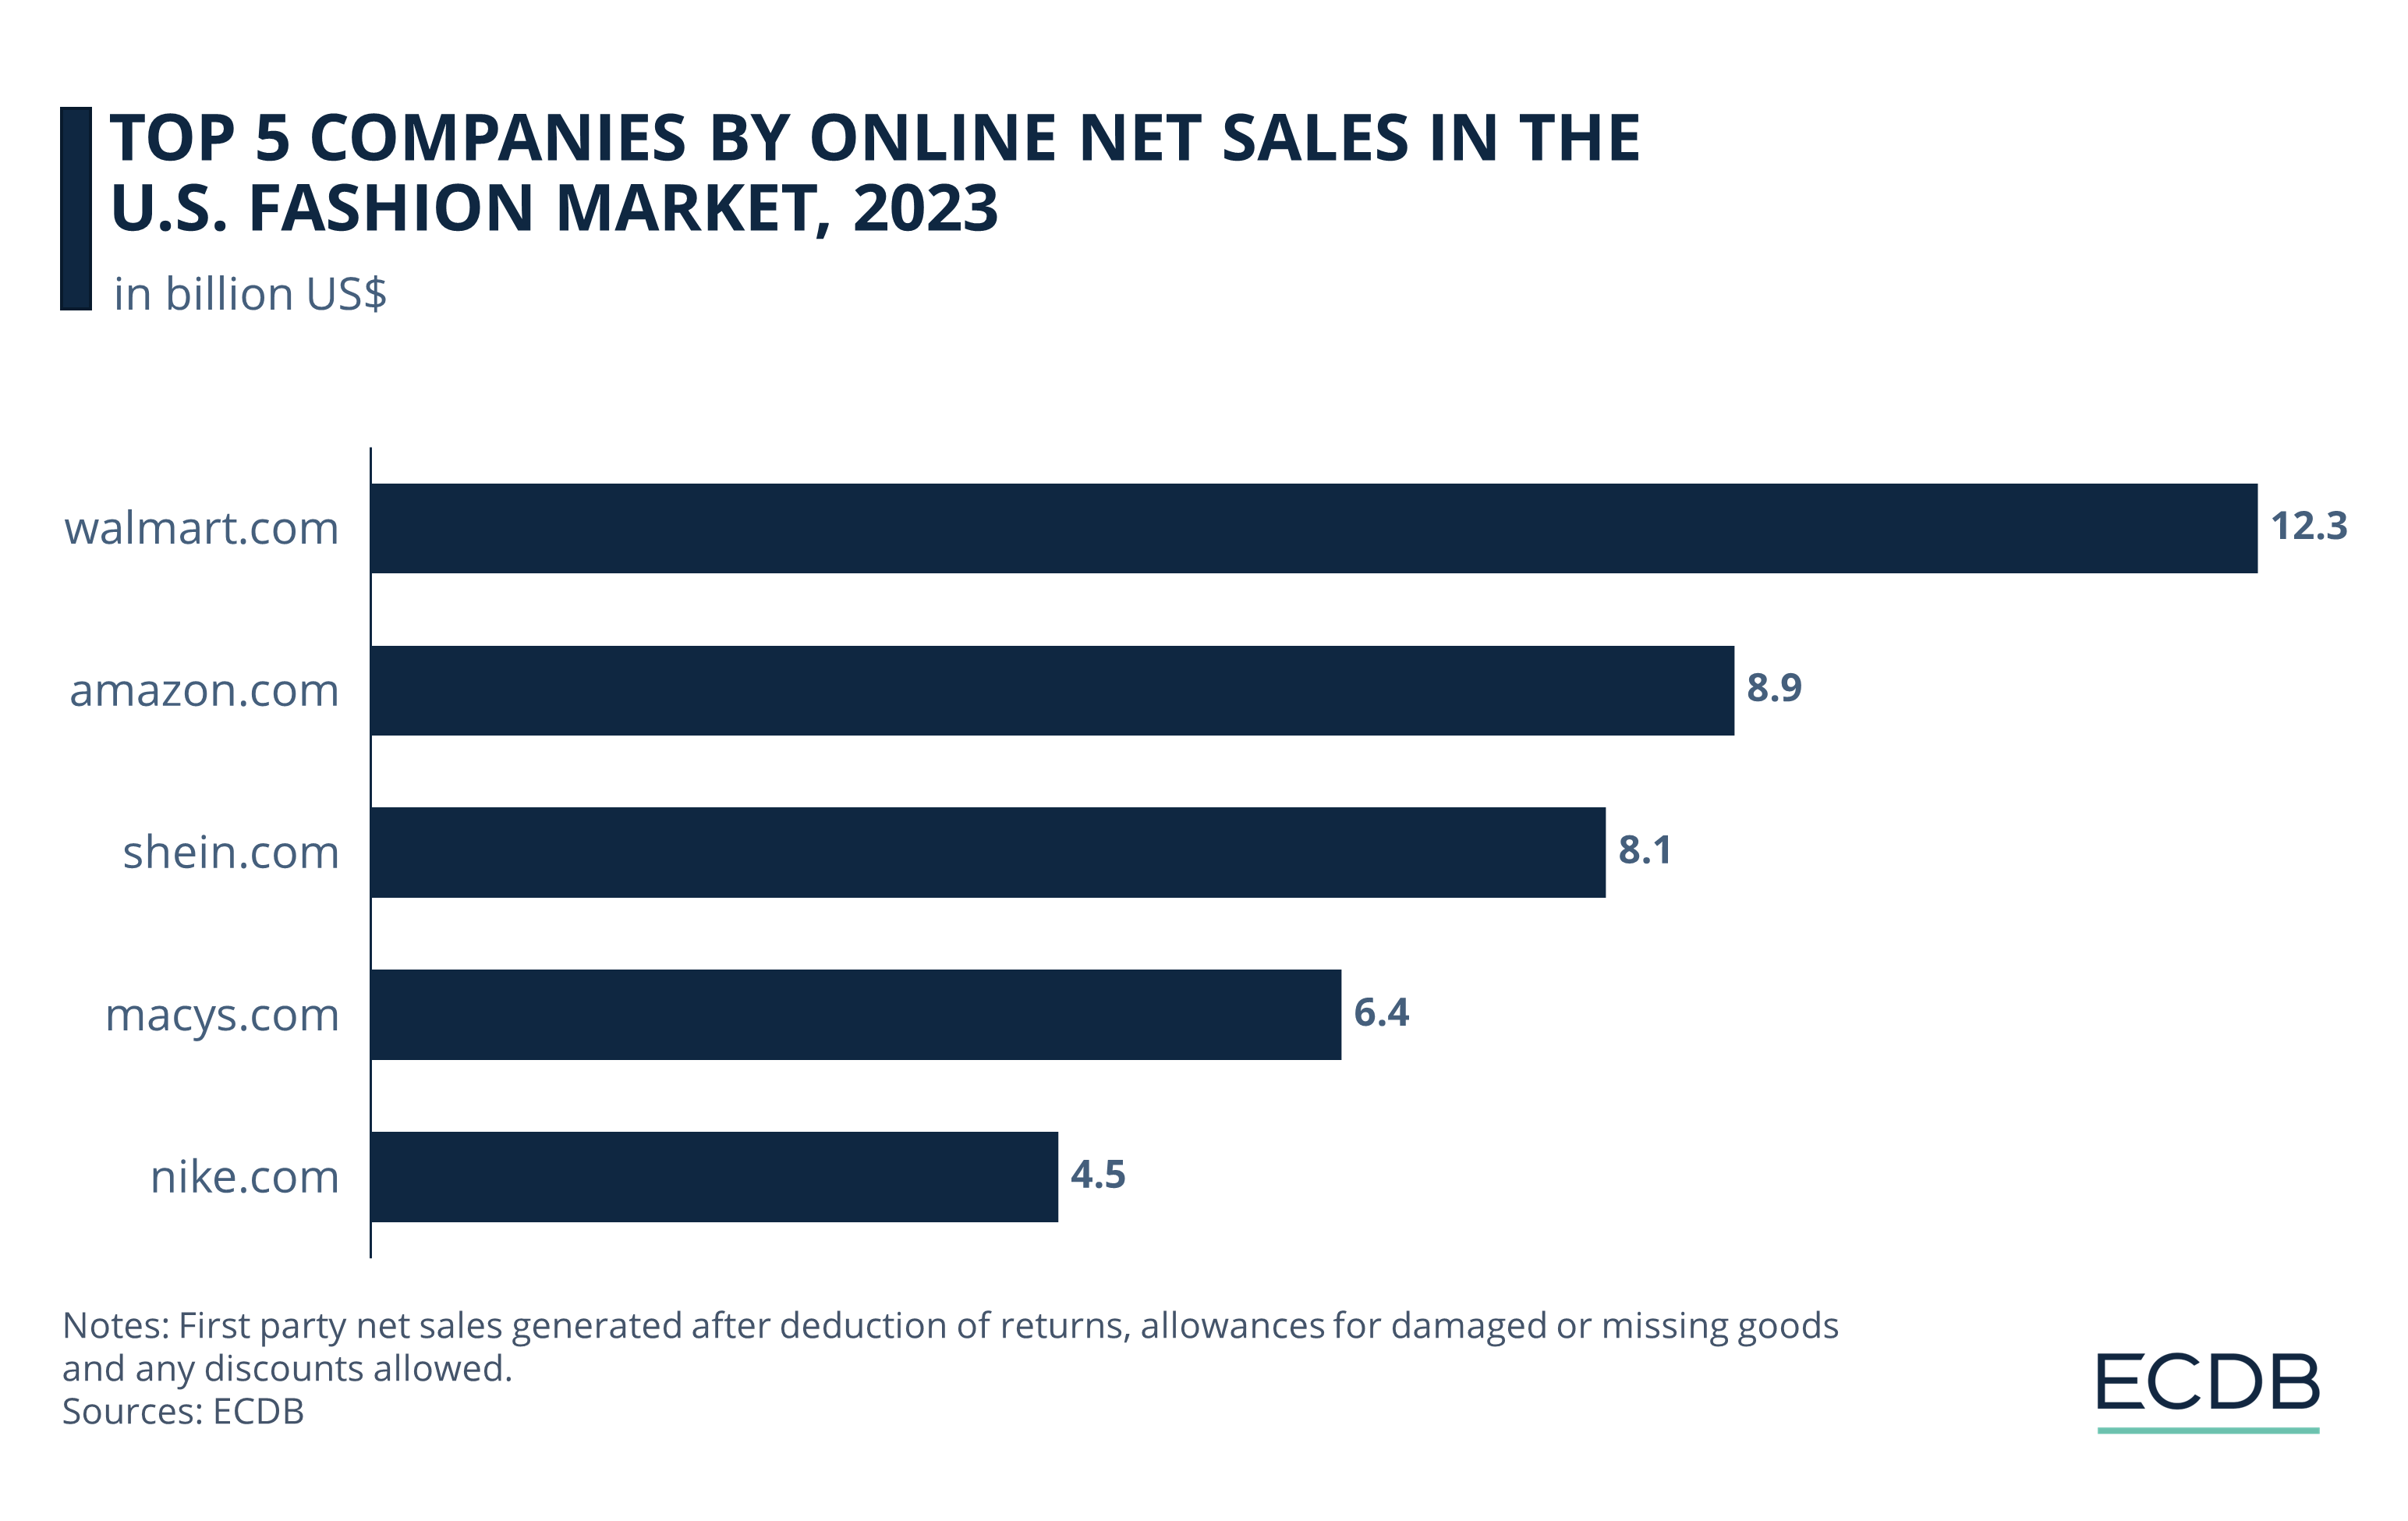 Top 5 Companies by Online Net Sales in the U.S. Fashion Market, 2022